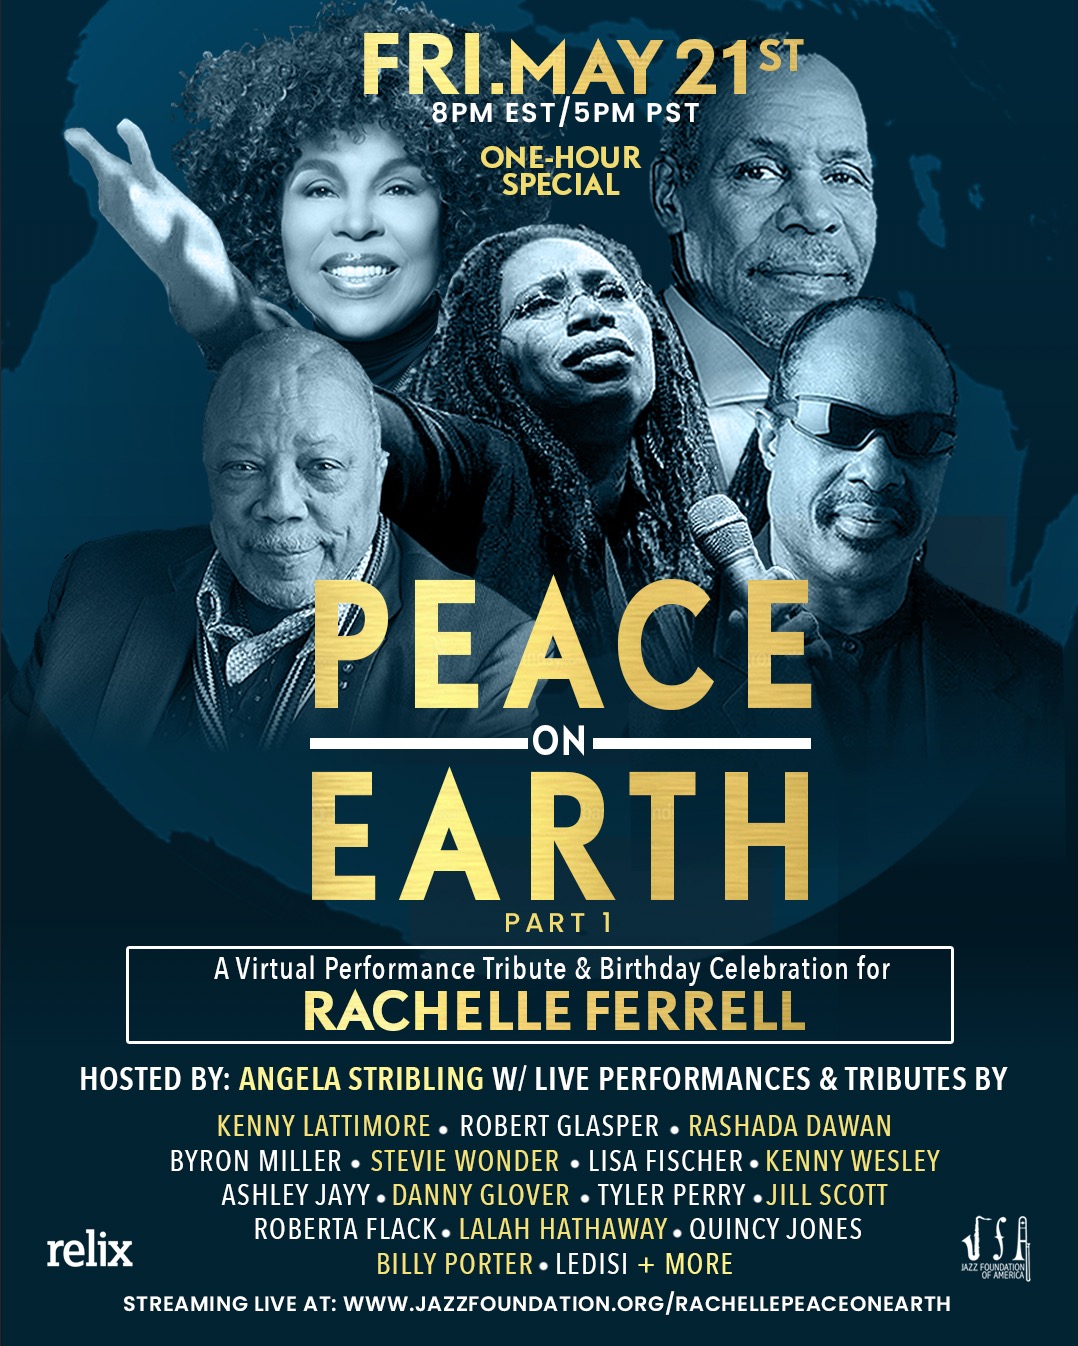 A Virtual Performance Tribute and Celebration Birthday Benefit for Rachelle Ferrell and the Jazz Foundation of America